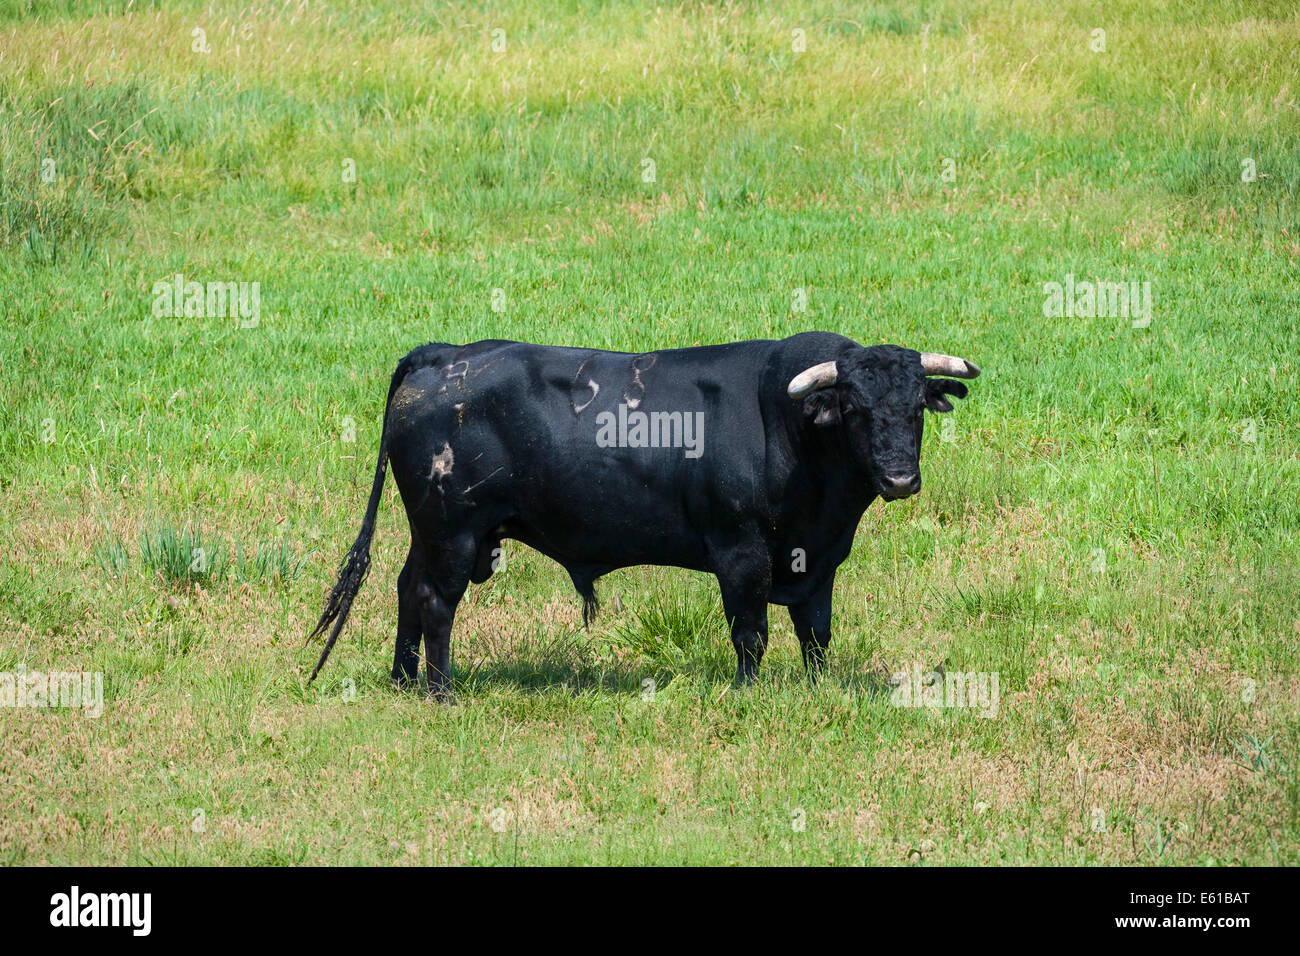 Black bull in field being bred for bullfighting in the Carmargue France. JMH6280 Stock Photo